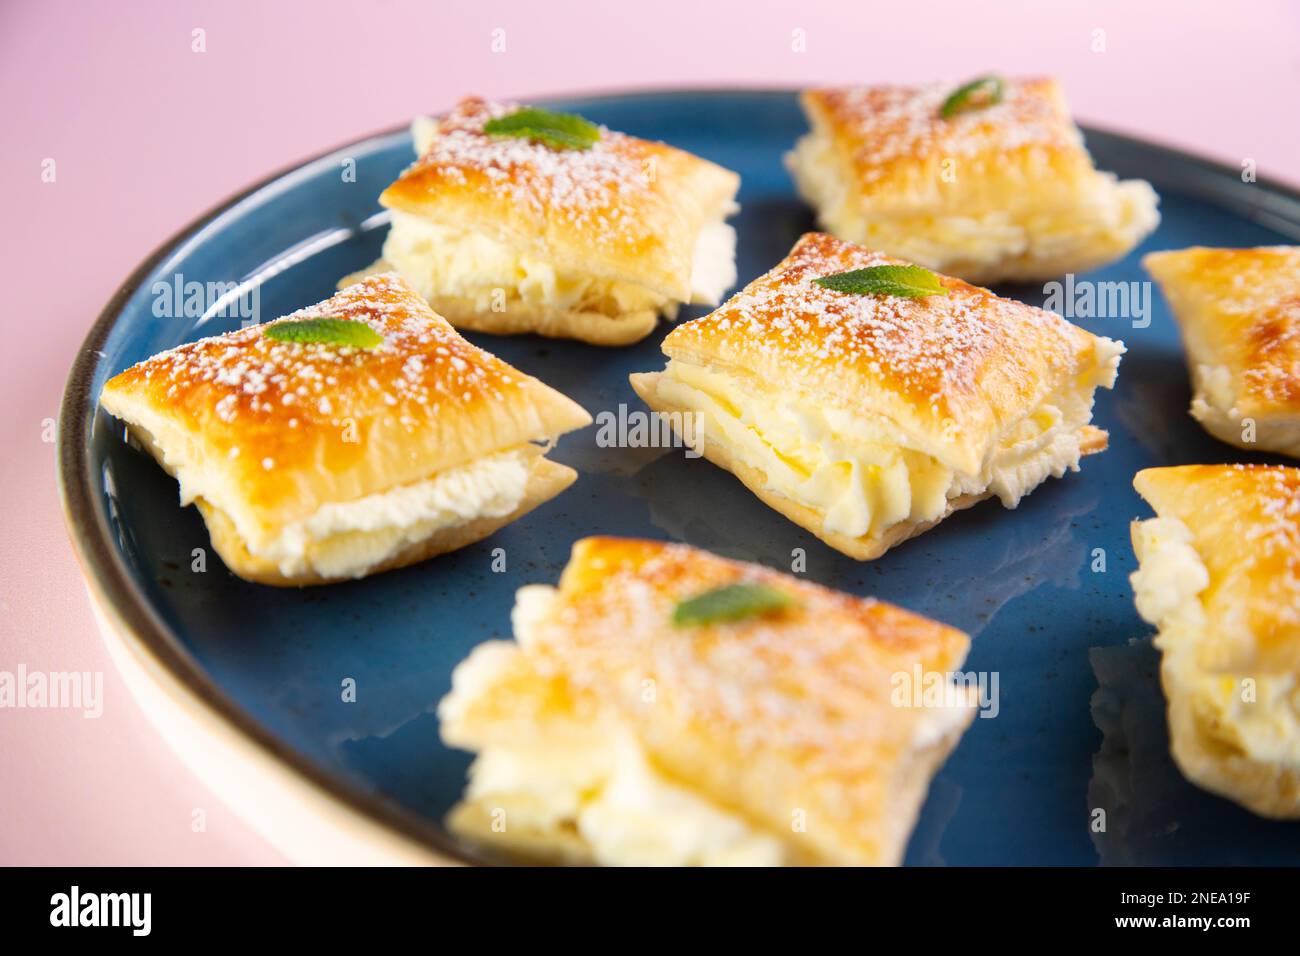 The Miguelitos de La Roda are little cakes made with puff pastry and pastry cream. Stock Photo